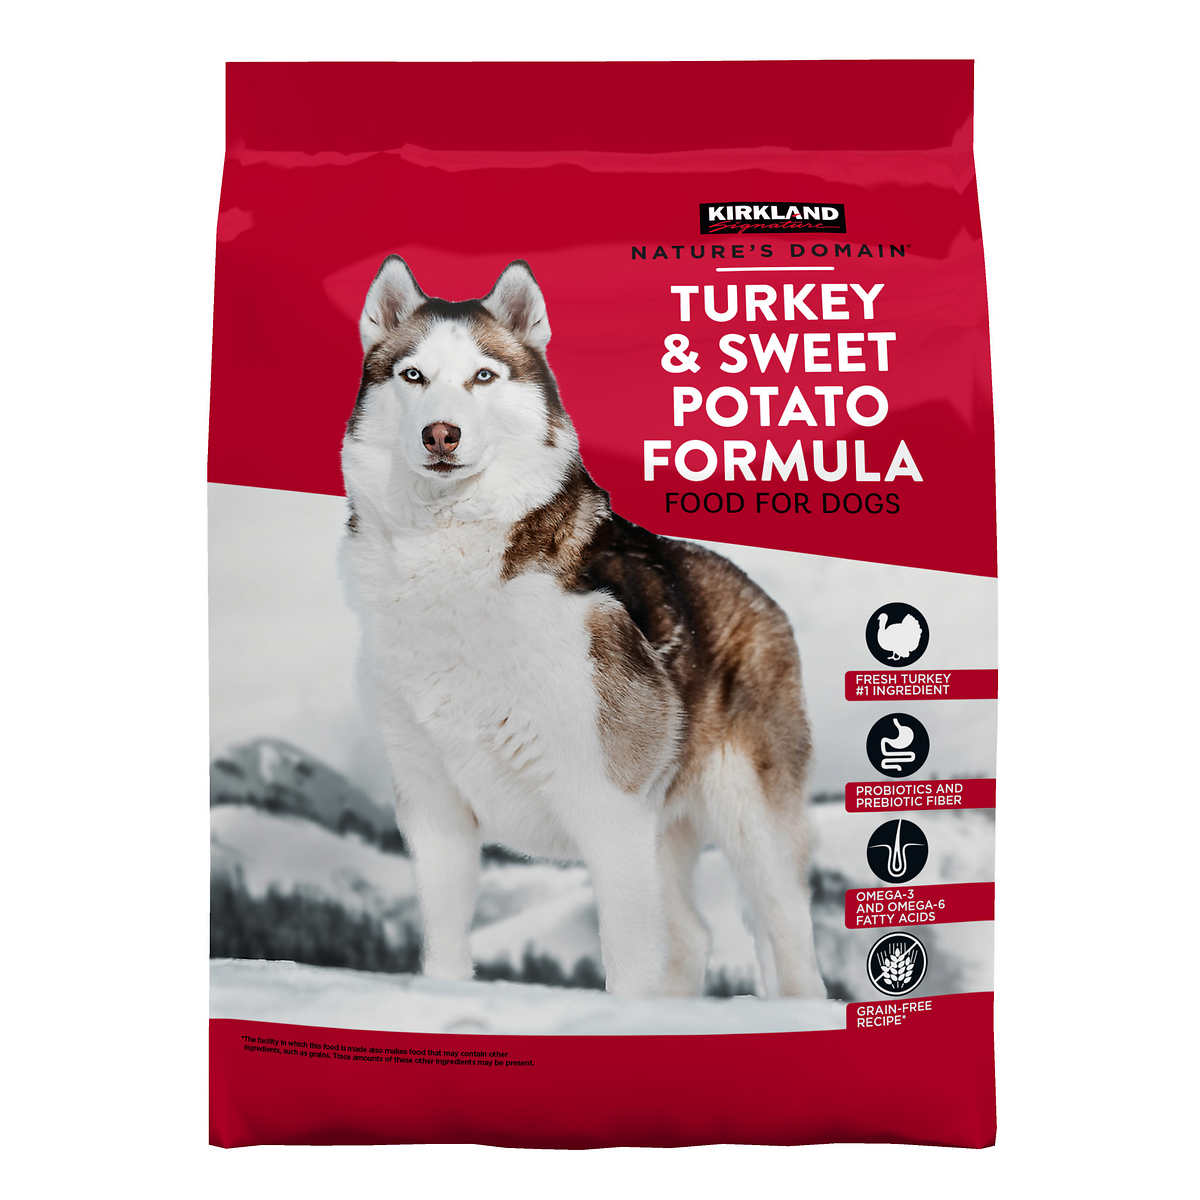 Wellness Toy Breed Dog Food Reviews - Wow Blog